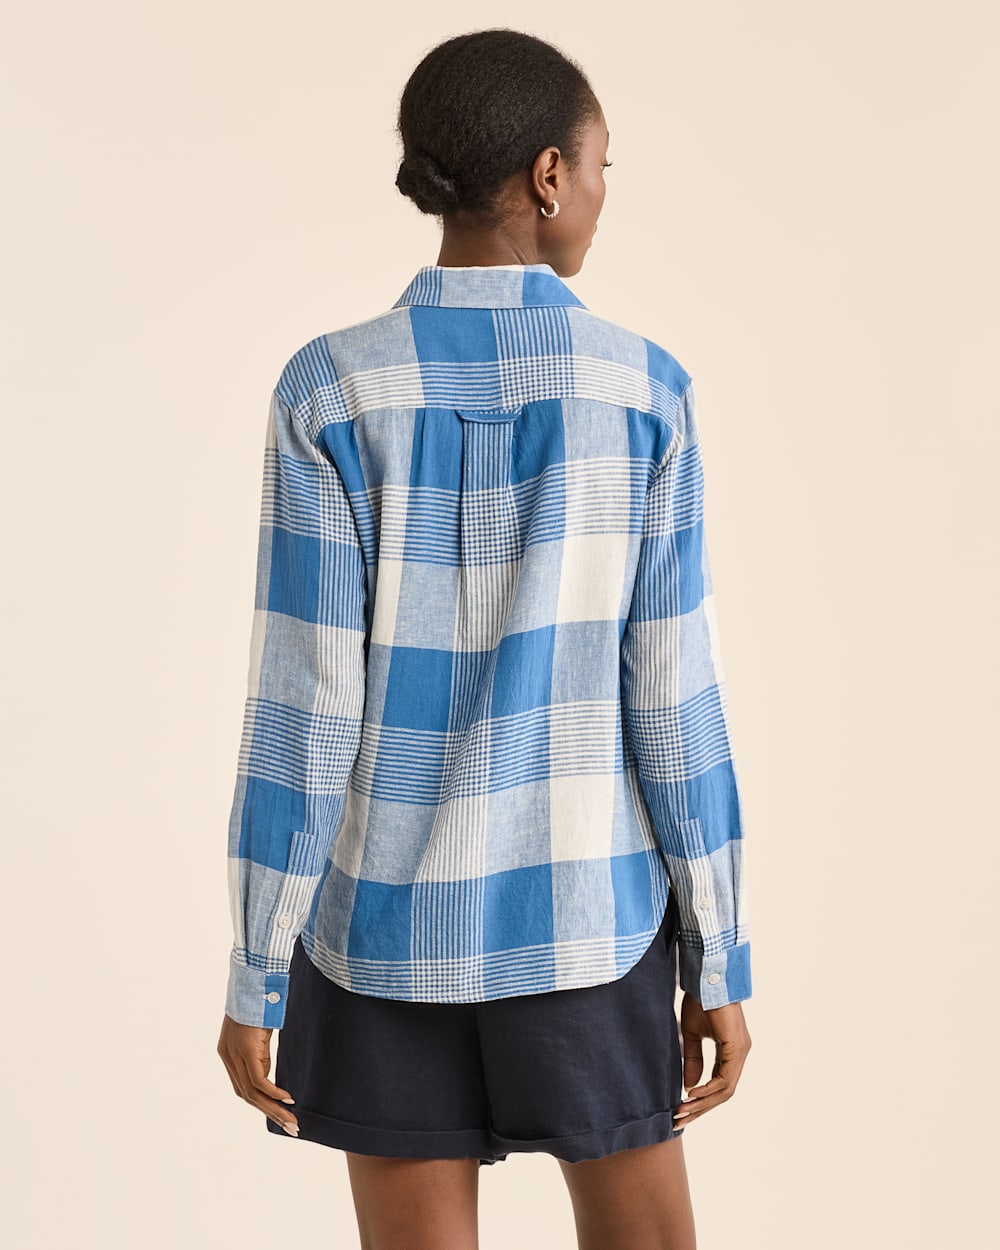 ALTERNATE VIEW OF WOMEN'S ADLEY LINEN-BLEND SHIRT IN BLUE/IVORY CHECK image number 3